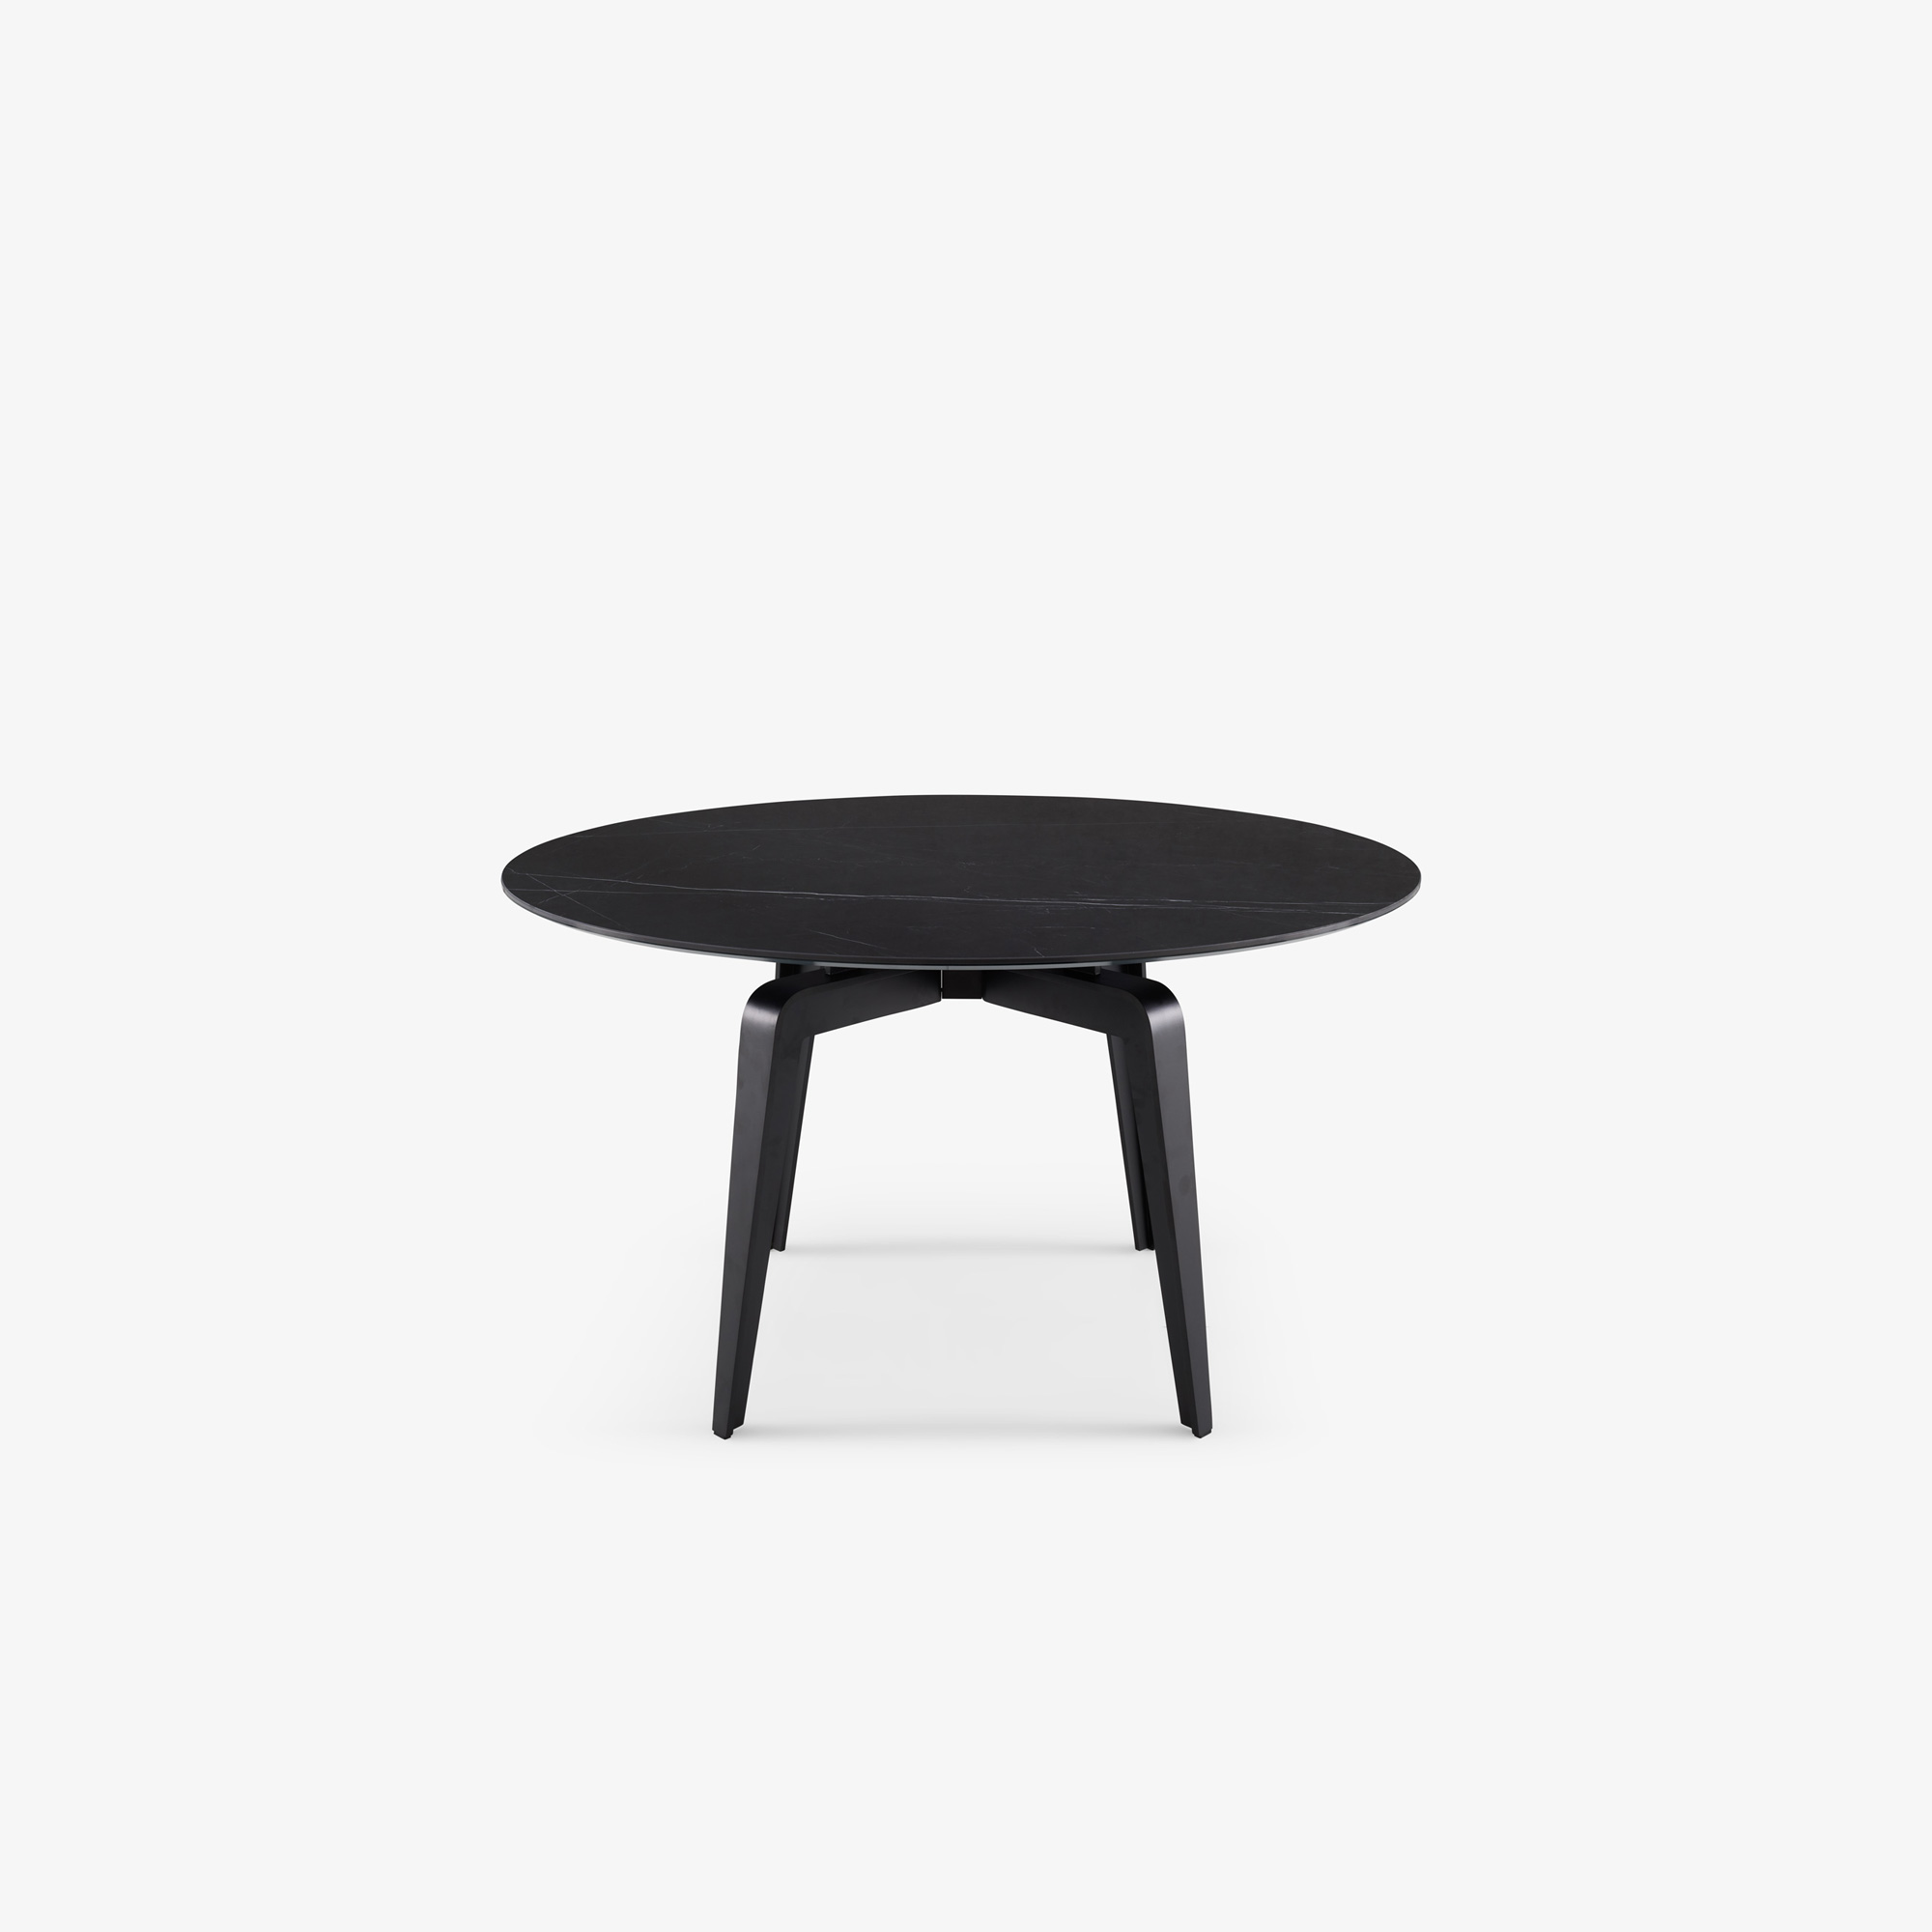 Image ROUND DINING TABLE BLACK LACQUERED BASE 